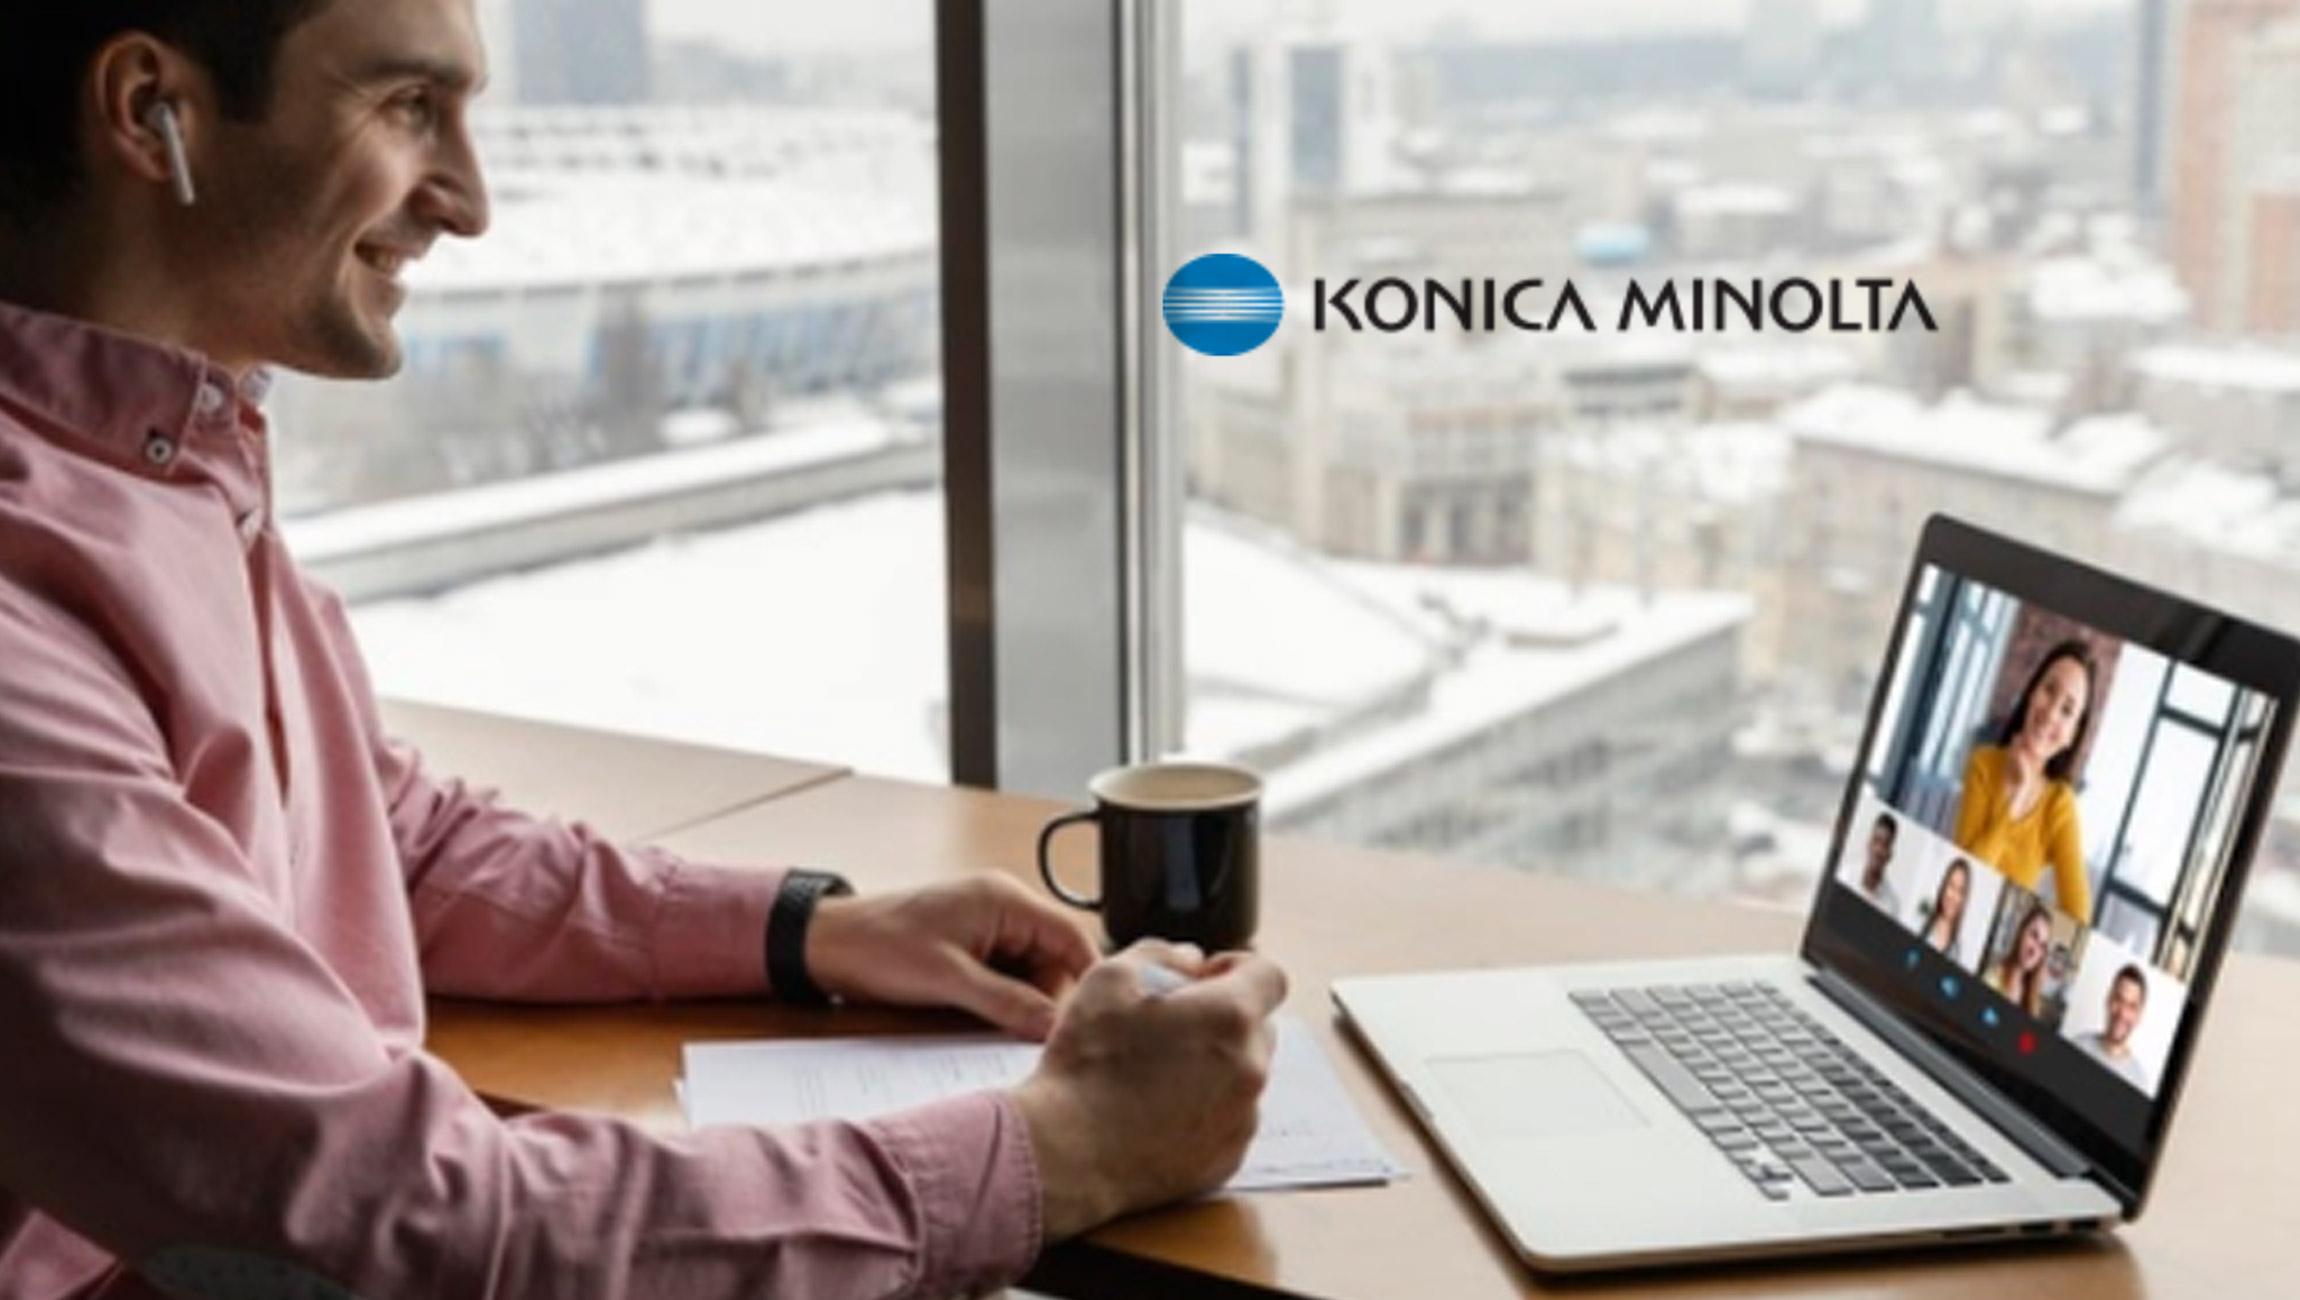 Konica Minolta Named a Leader in Worldwide Print for the Distributed Workforce by IDC MarketScape